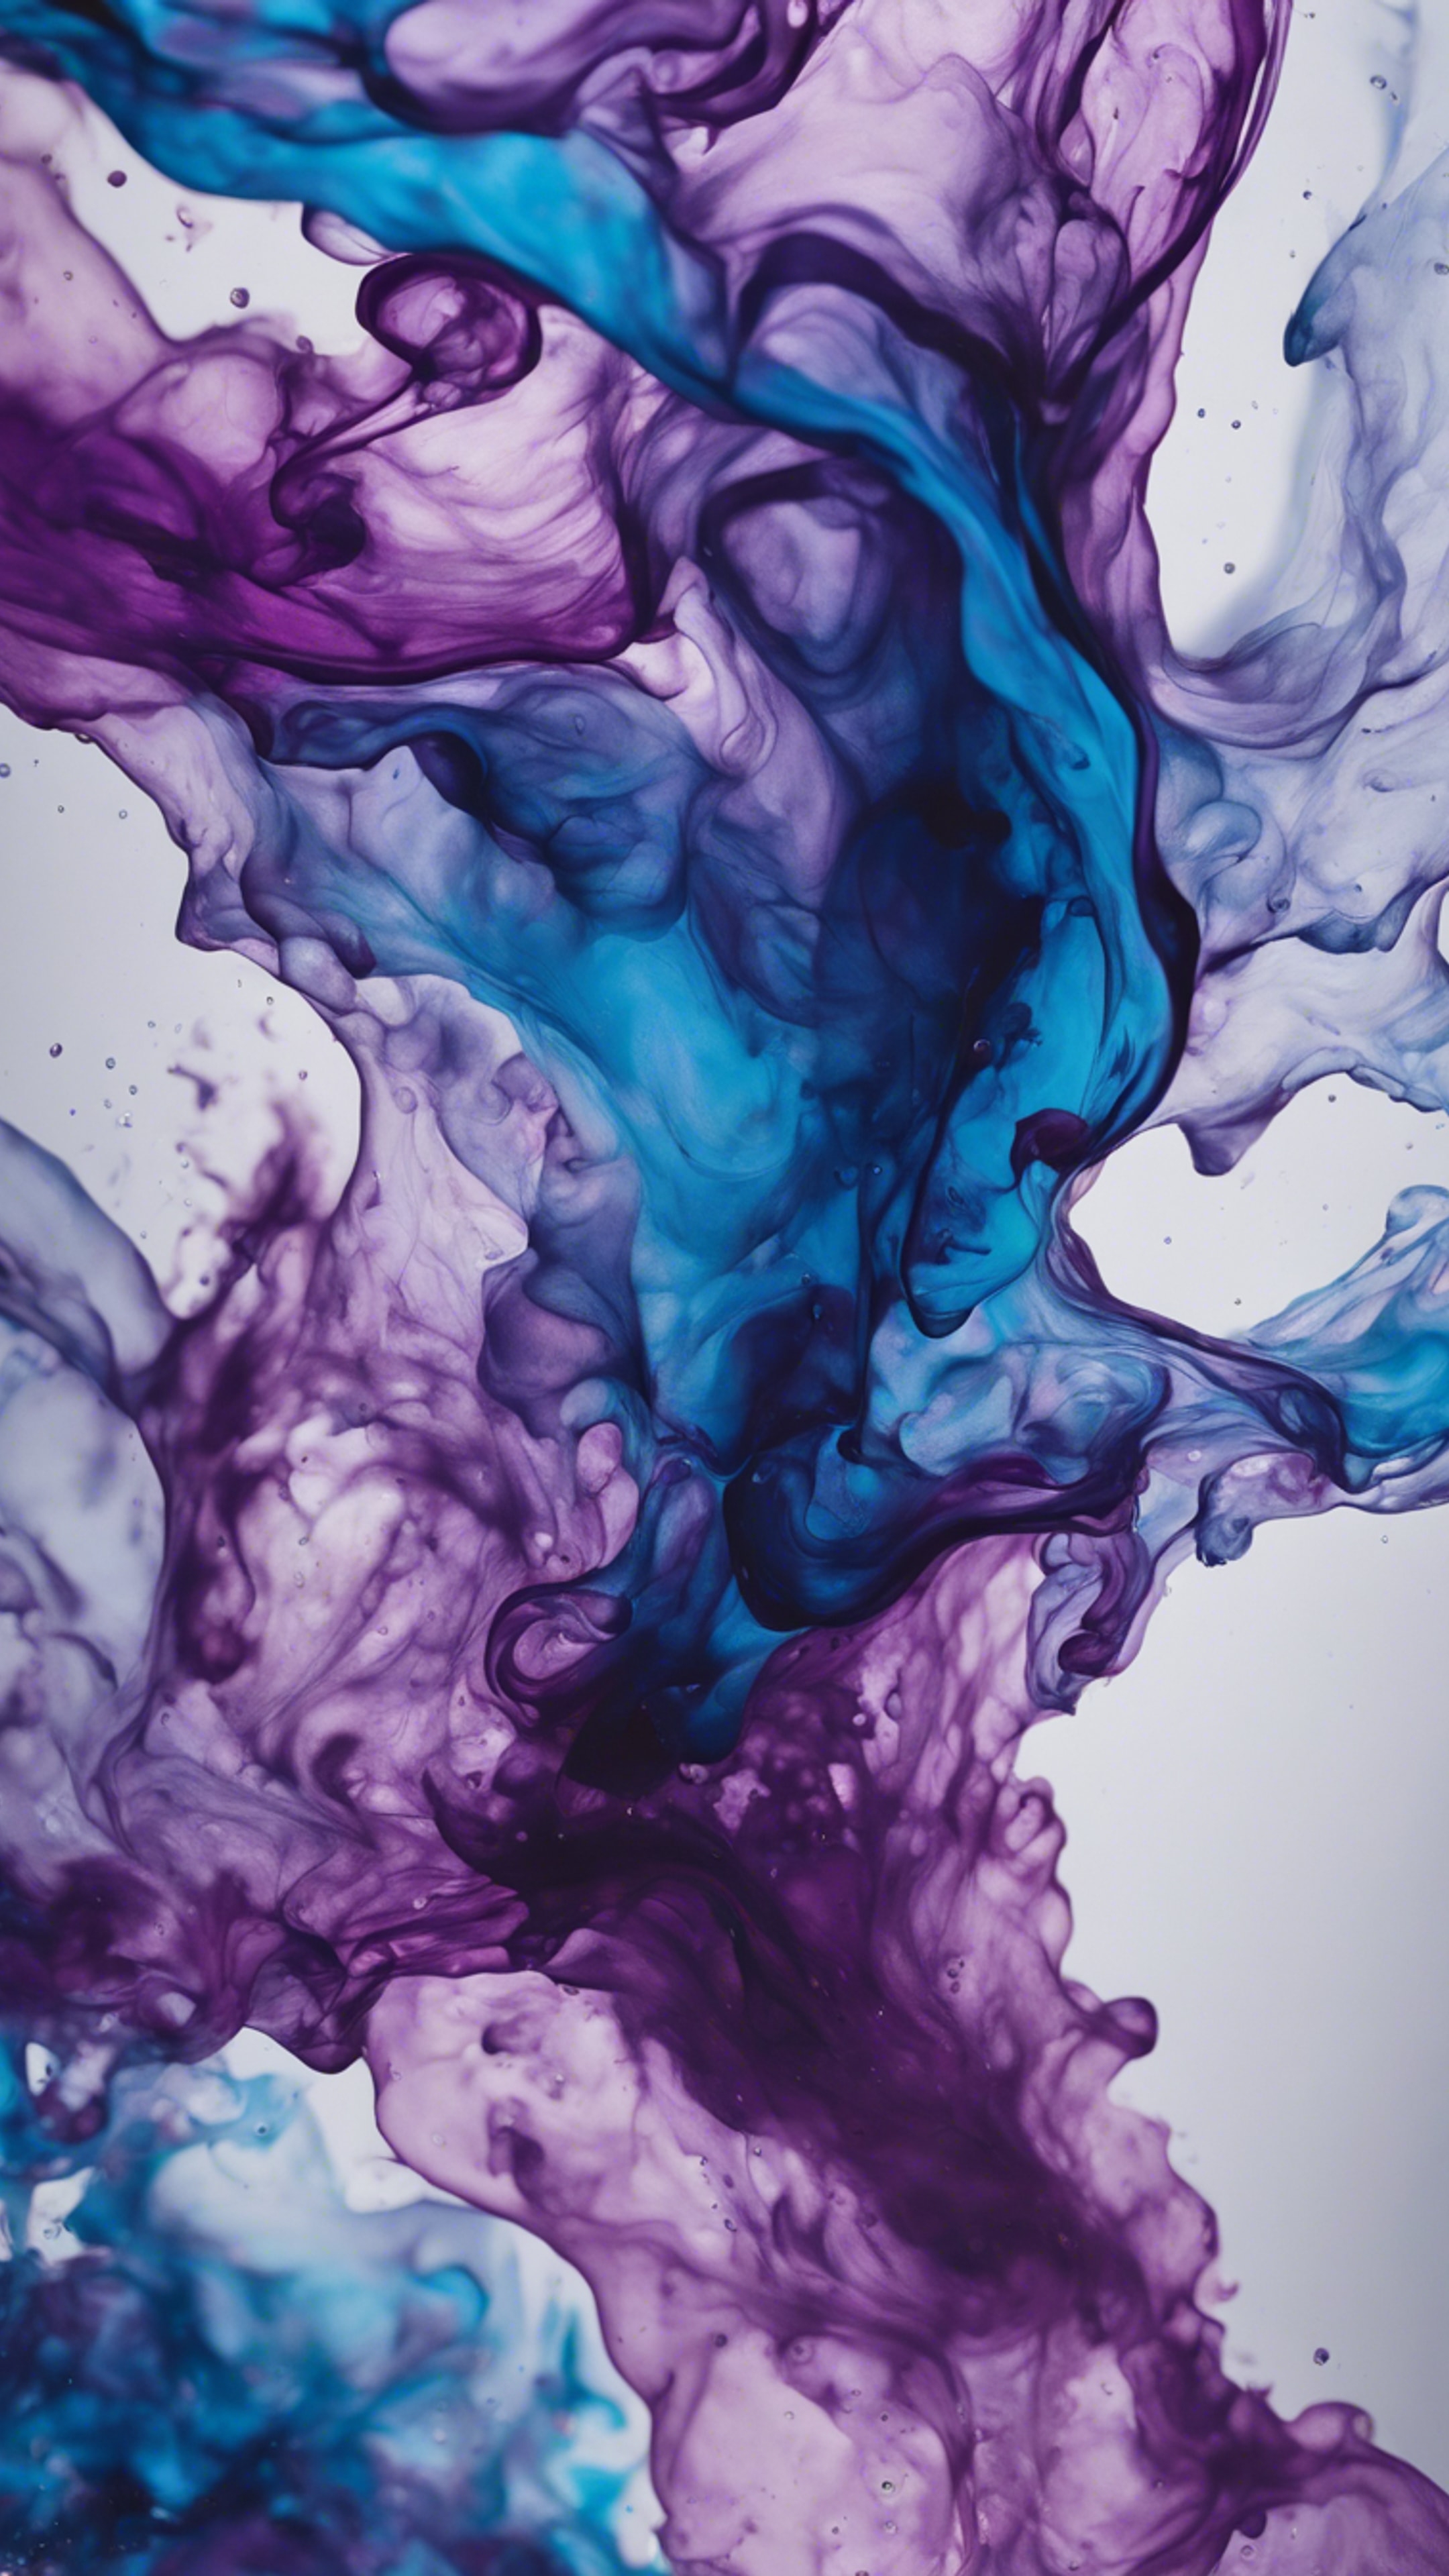 An abstract fluid art piece with swirling waves of ink in hues of cool blue and passionate purple. Обои[1f0e9ffb93e84991a030]